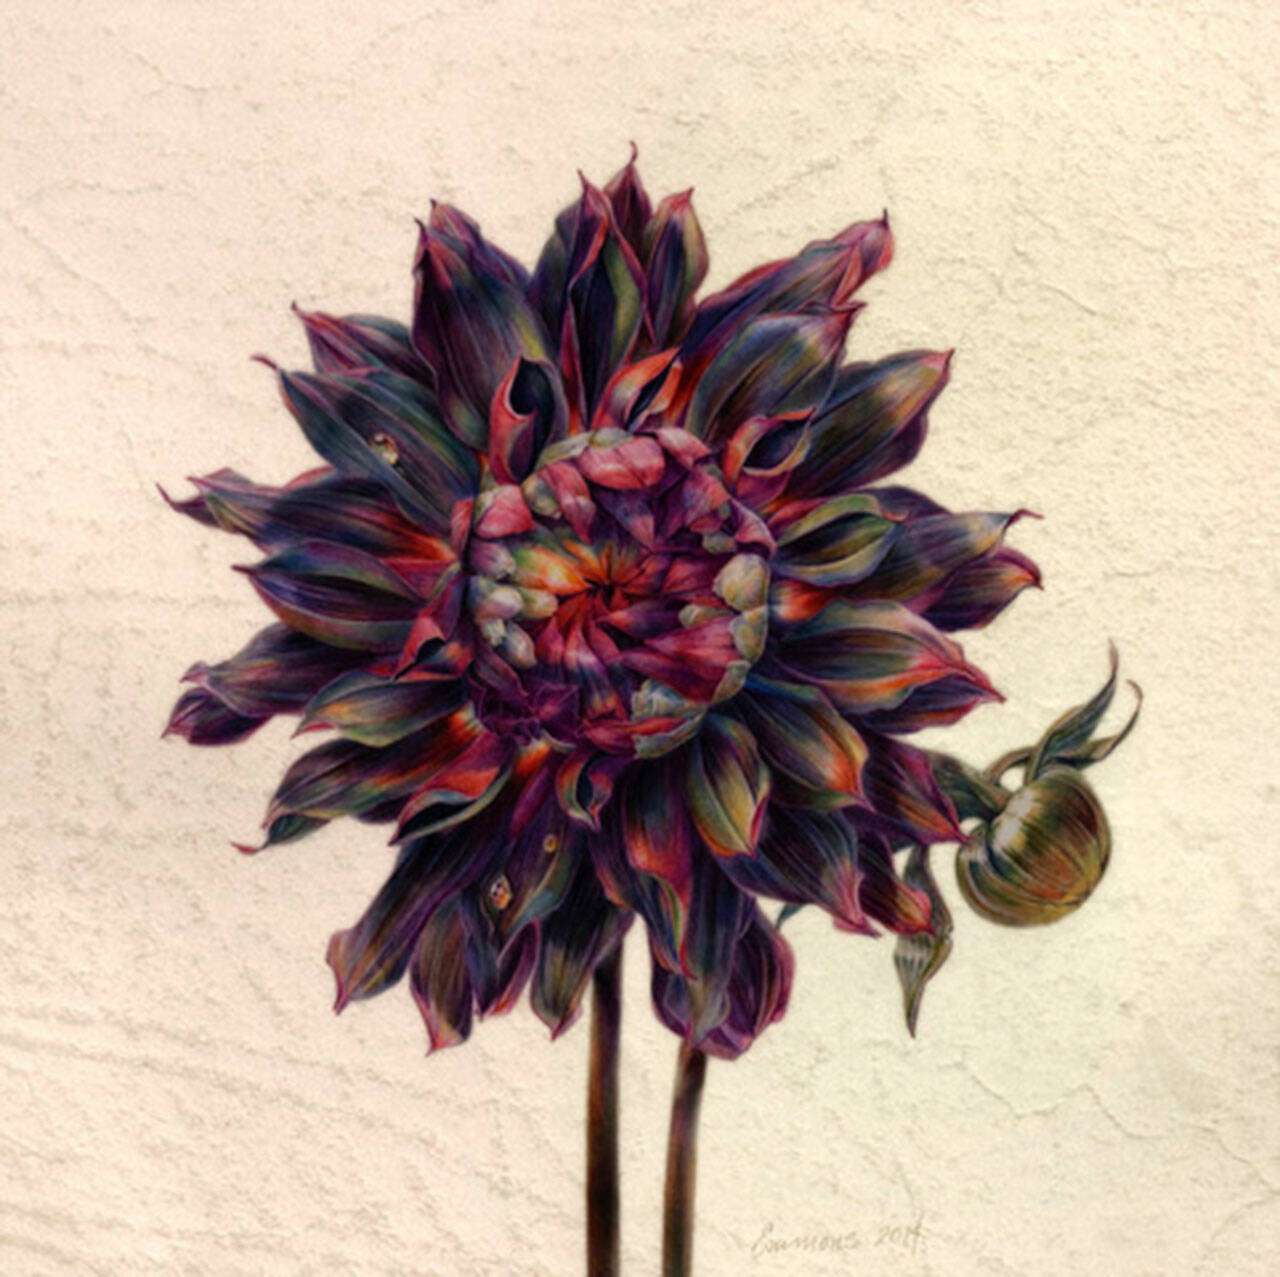 (Artwork by Jean Emmons © 2014) Dahlia ‘Rip City’ is a 12 x 12 inch watercolor on vellum, which will be exhibited this autumn in “A Botanical Rainbow” at Royal Botanic Gardens Kew, in London.